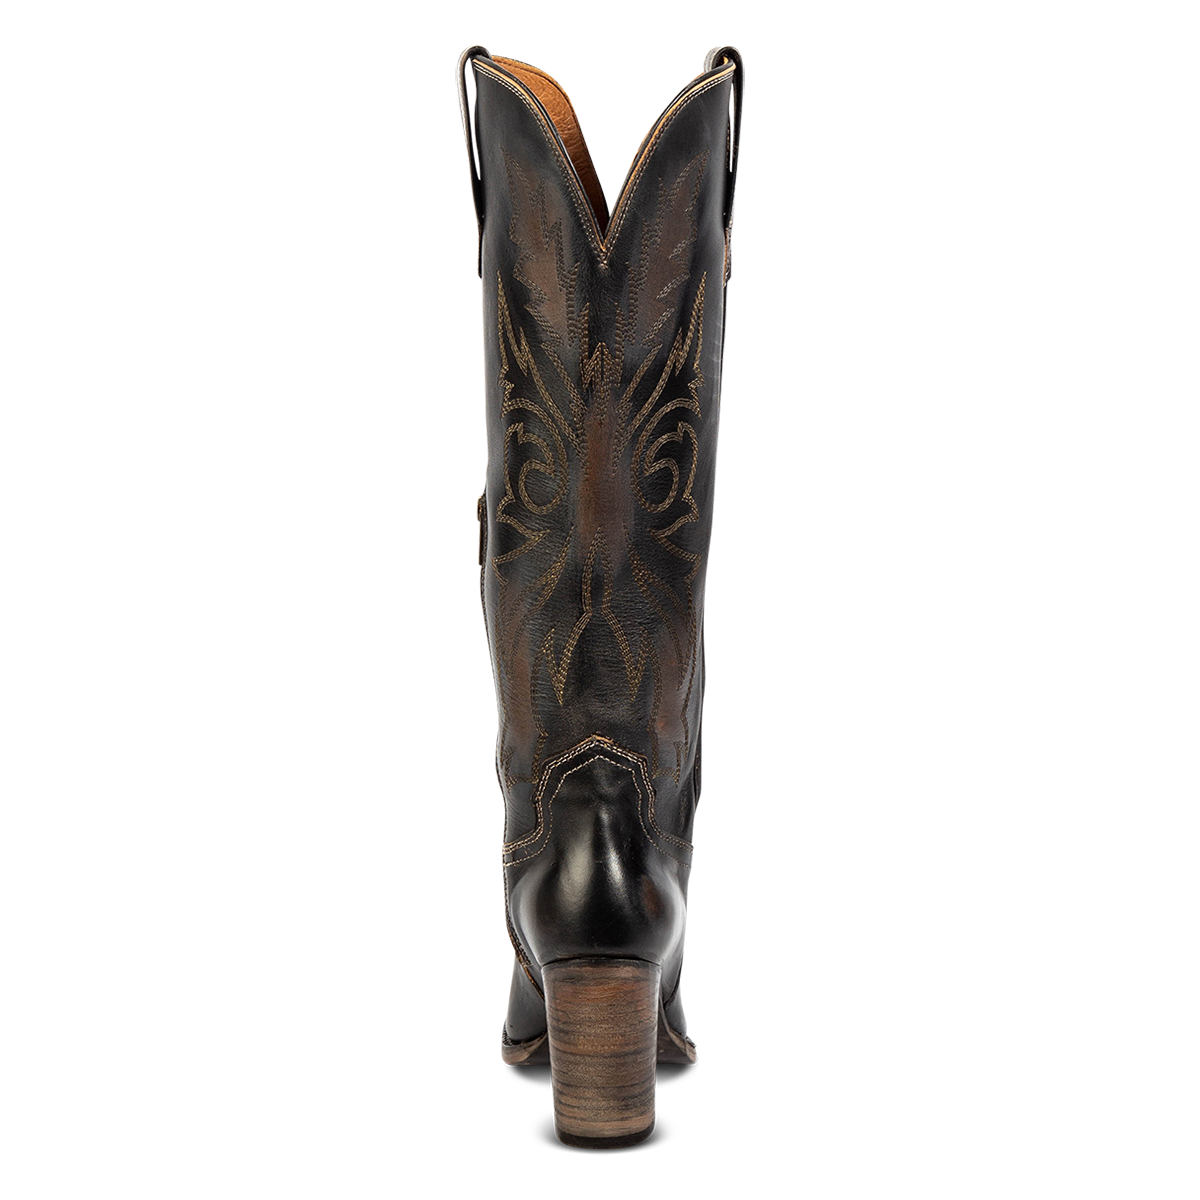 Back view showing a stacked heel, shaft stitch detailing and symmetrical leather pull straps on FREEBIRD women's Panama black leather boot